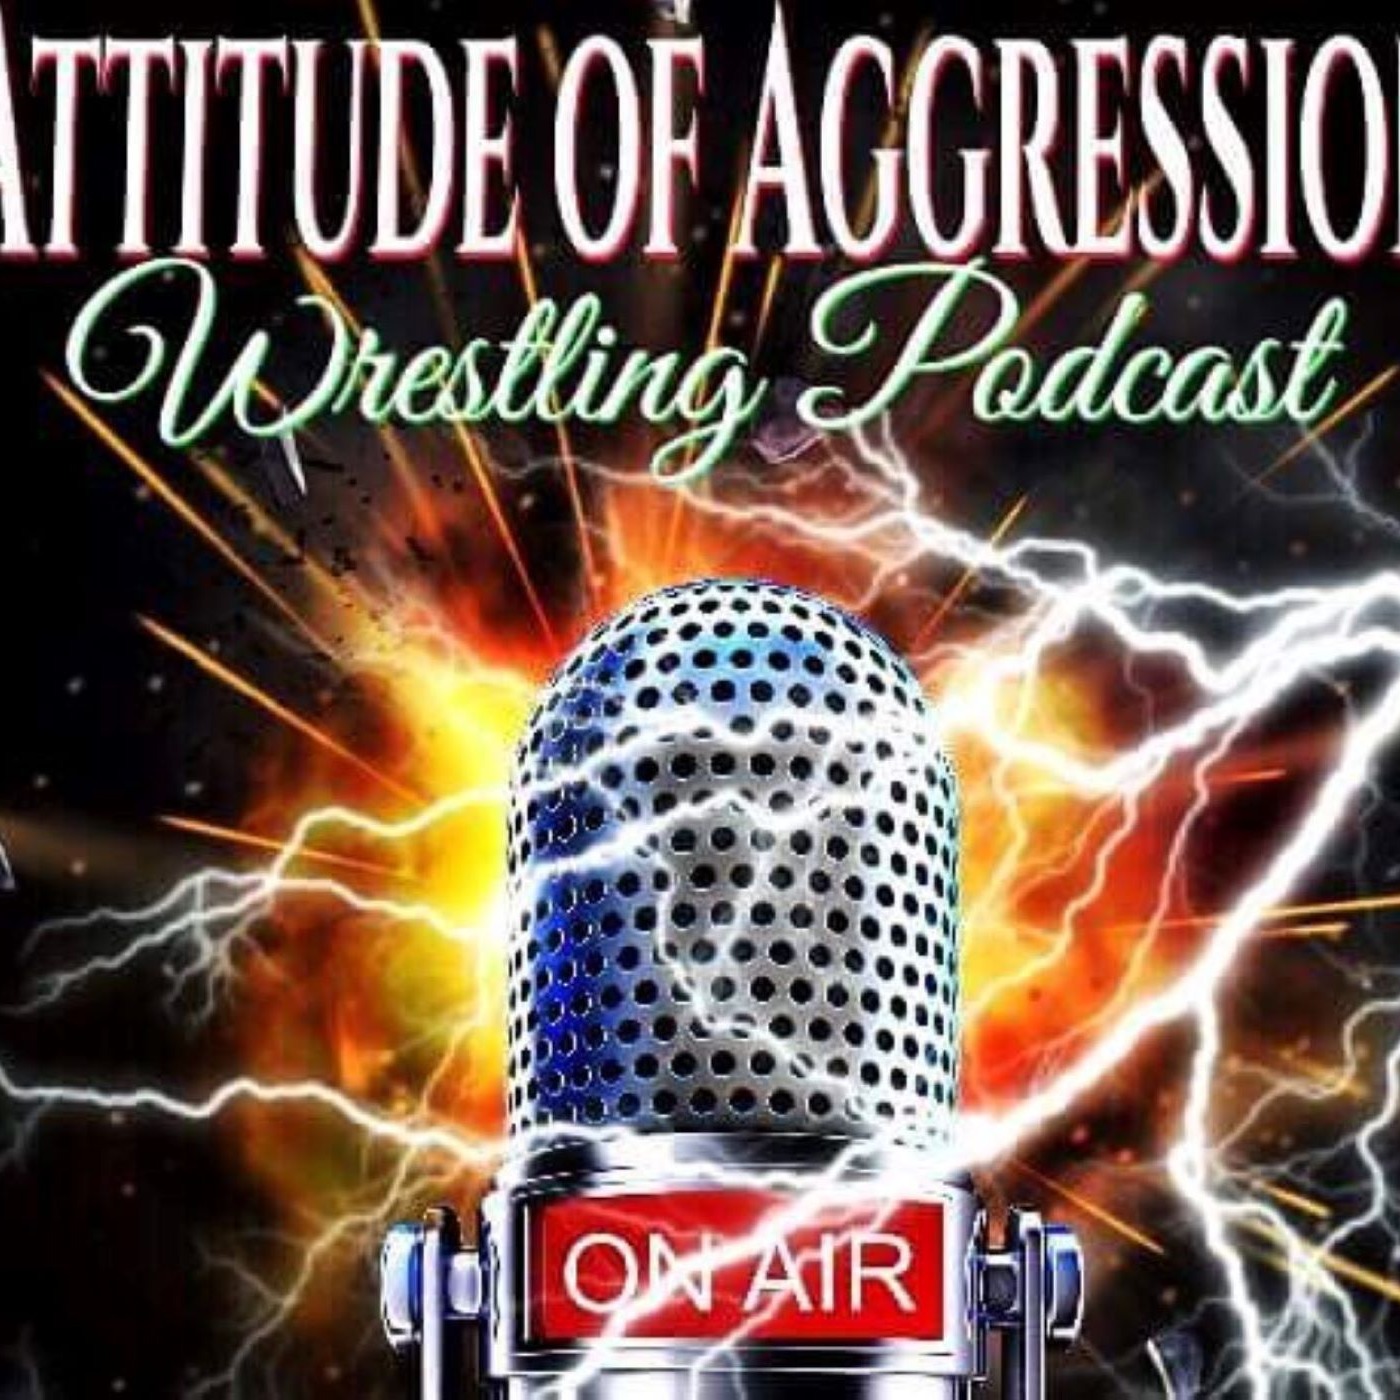 Attitude Of Aggression #290- The Big Four Project: Royal Rumble '93